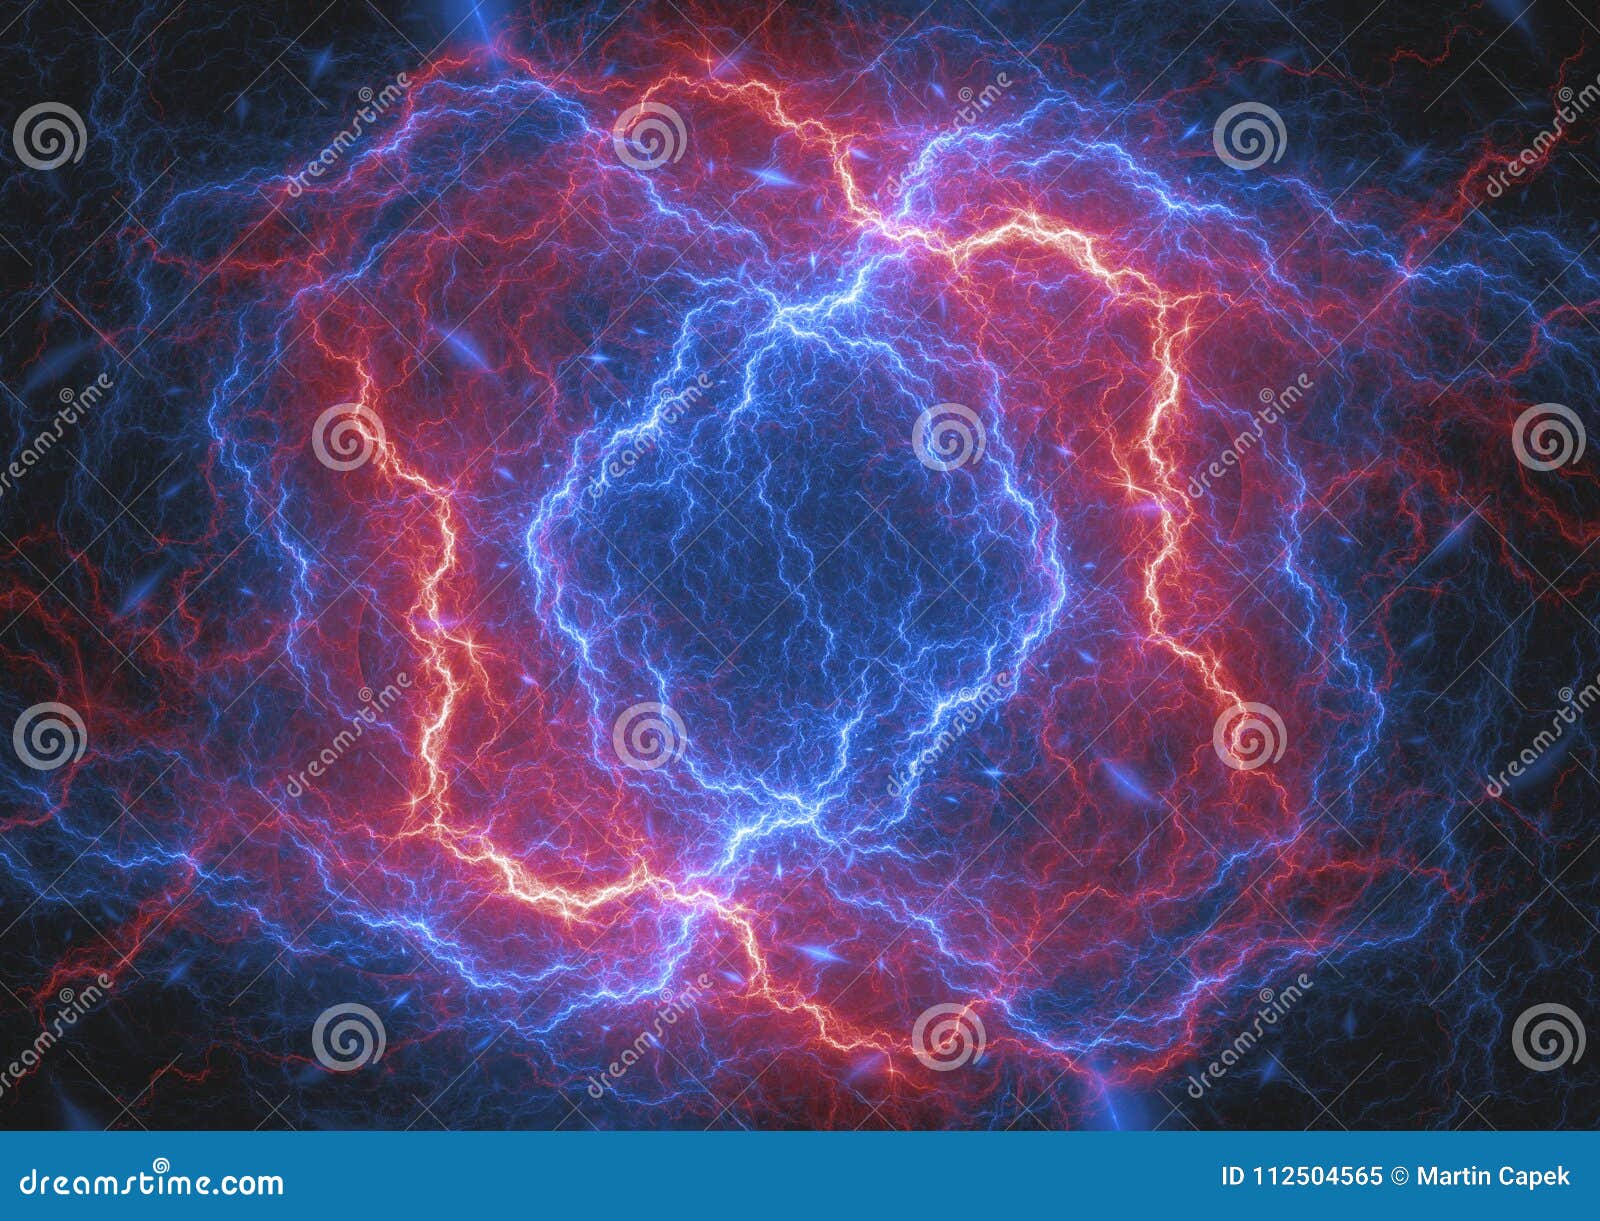 red and blue plasma ball